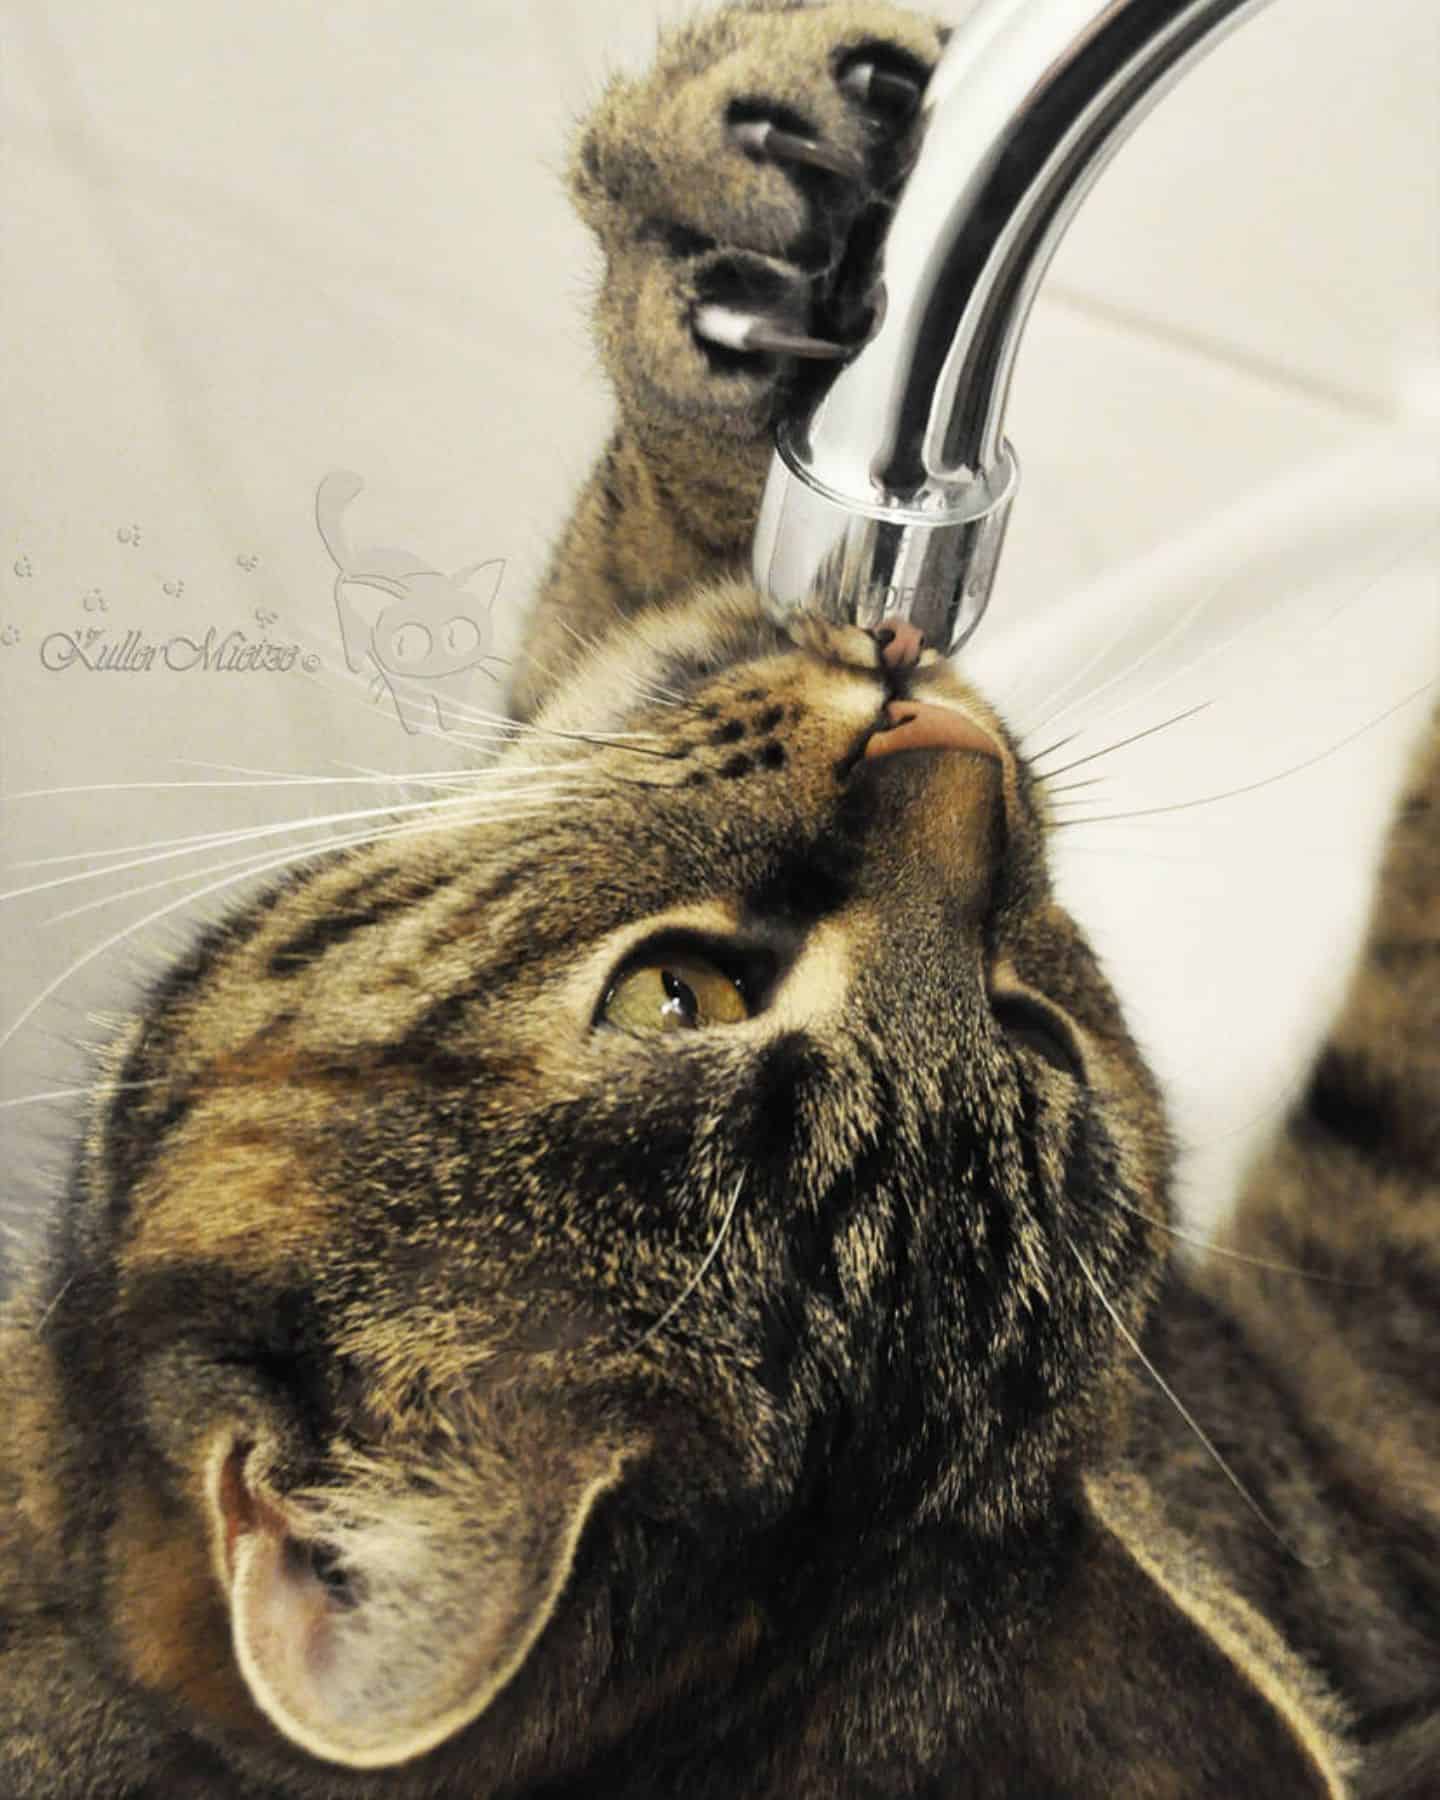 cat drinks water from the tap